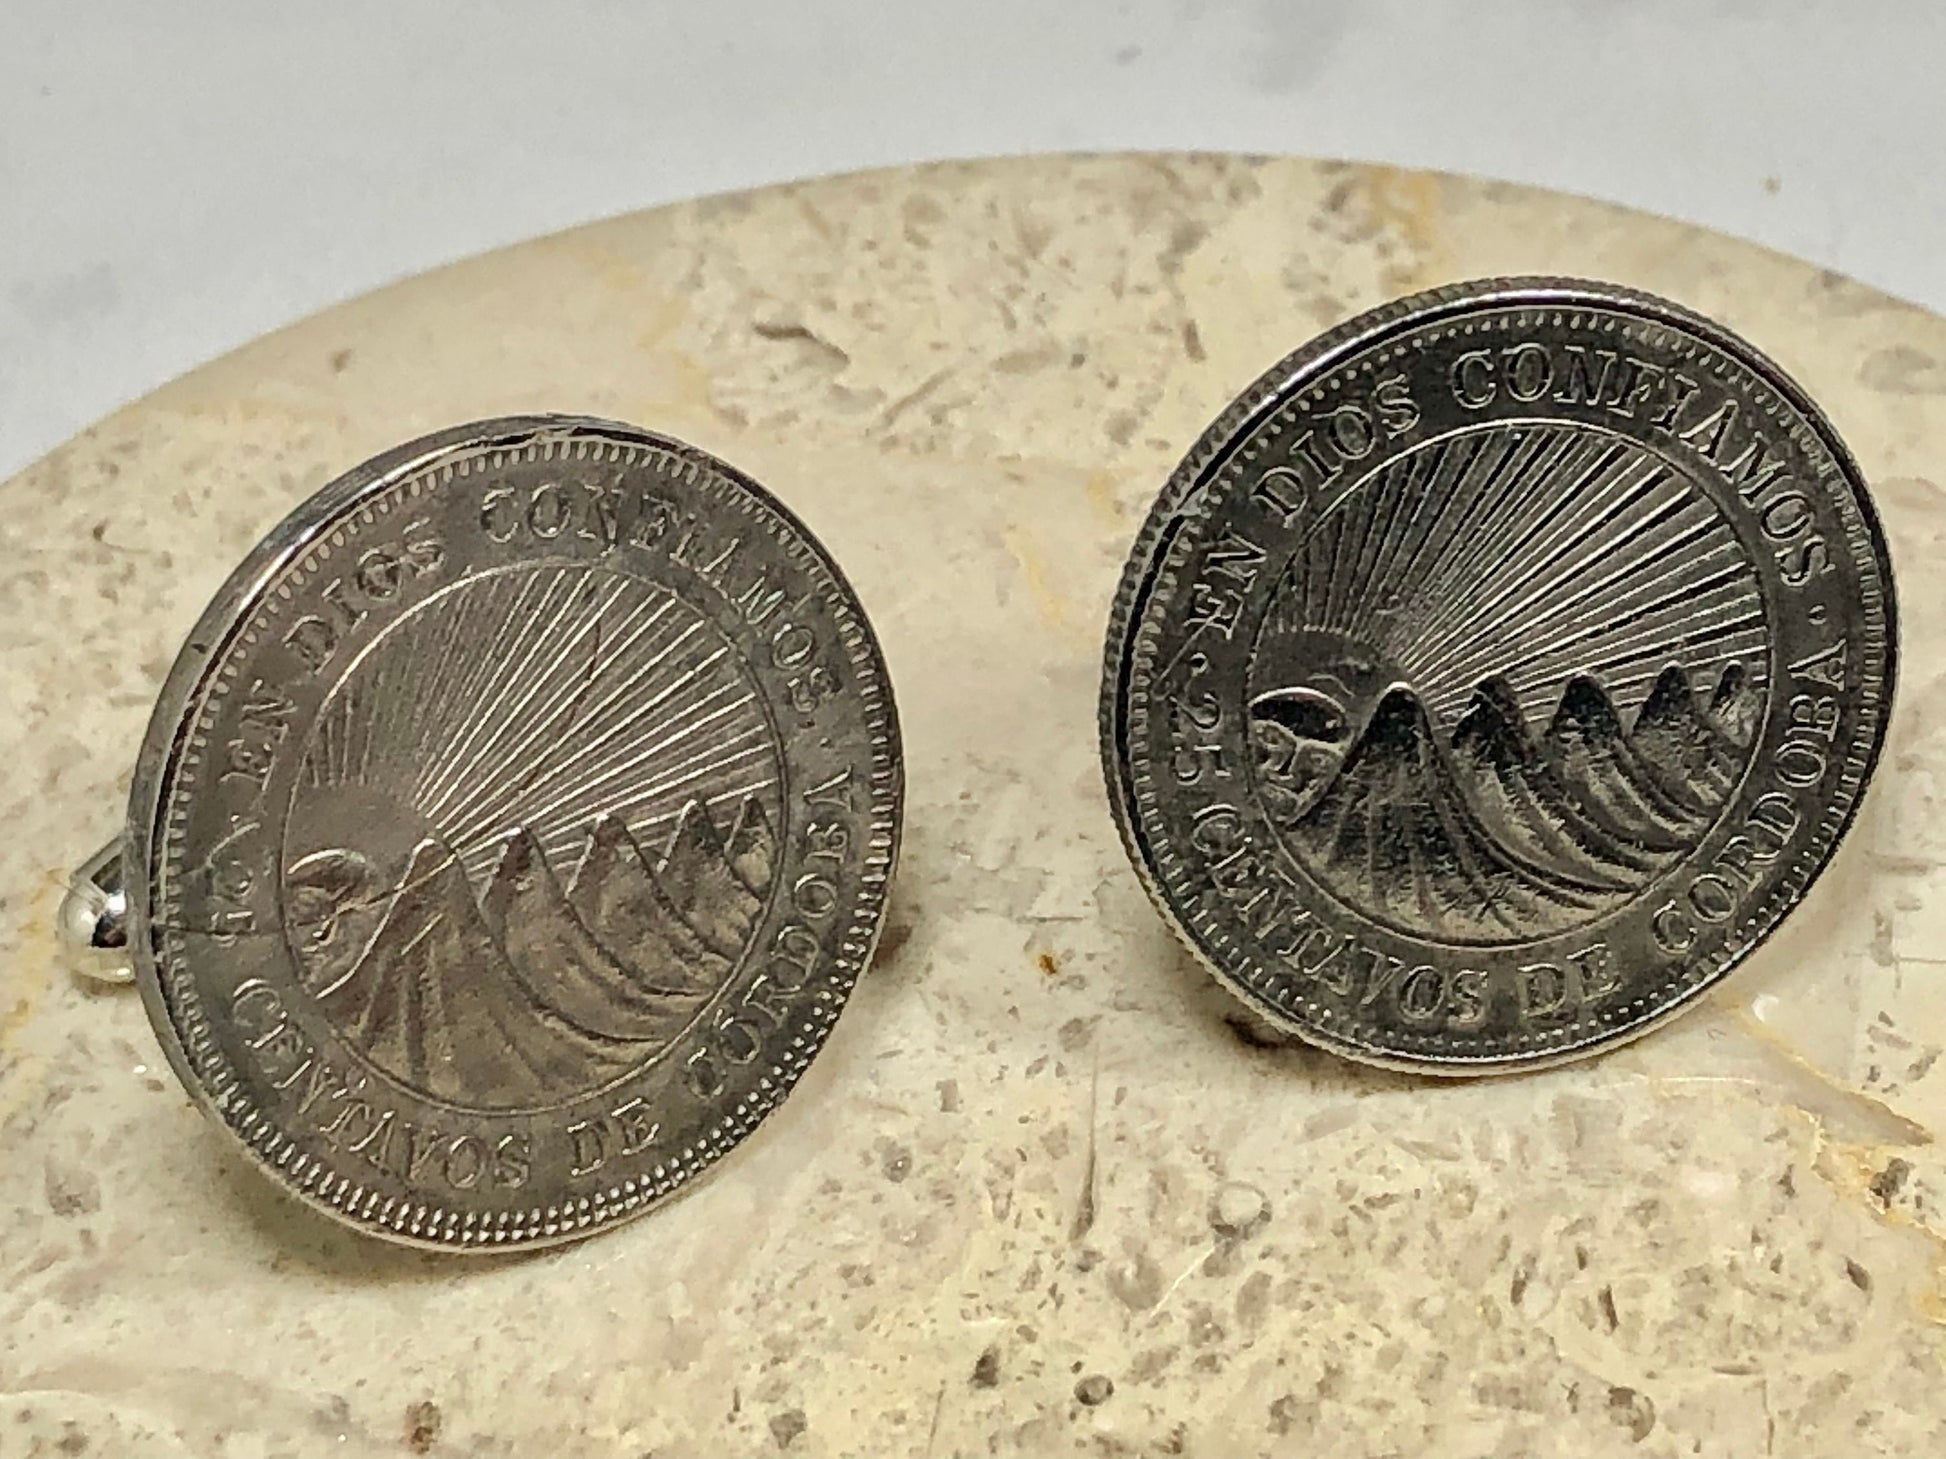 Nicaragua Coin Cuff Links Nicaraguan Centavos Custom Personal Vintage Handmade Jewelry Gift Friend Charm For Him Her World Coin Collector